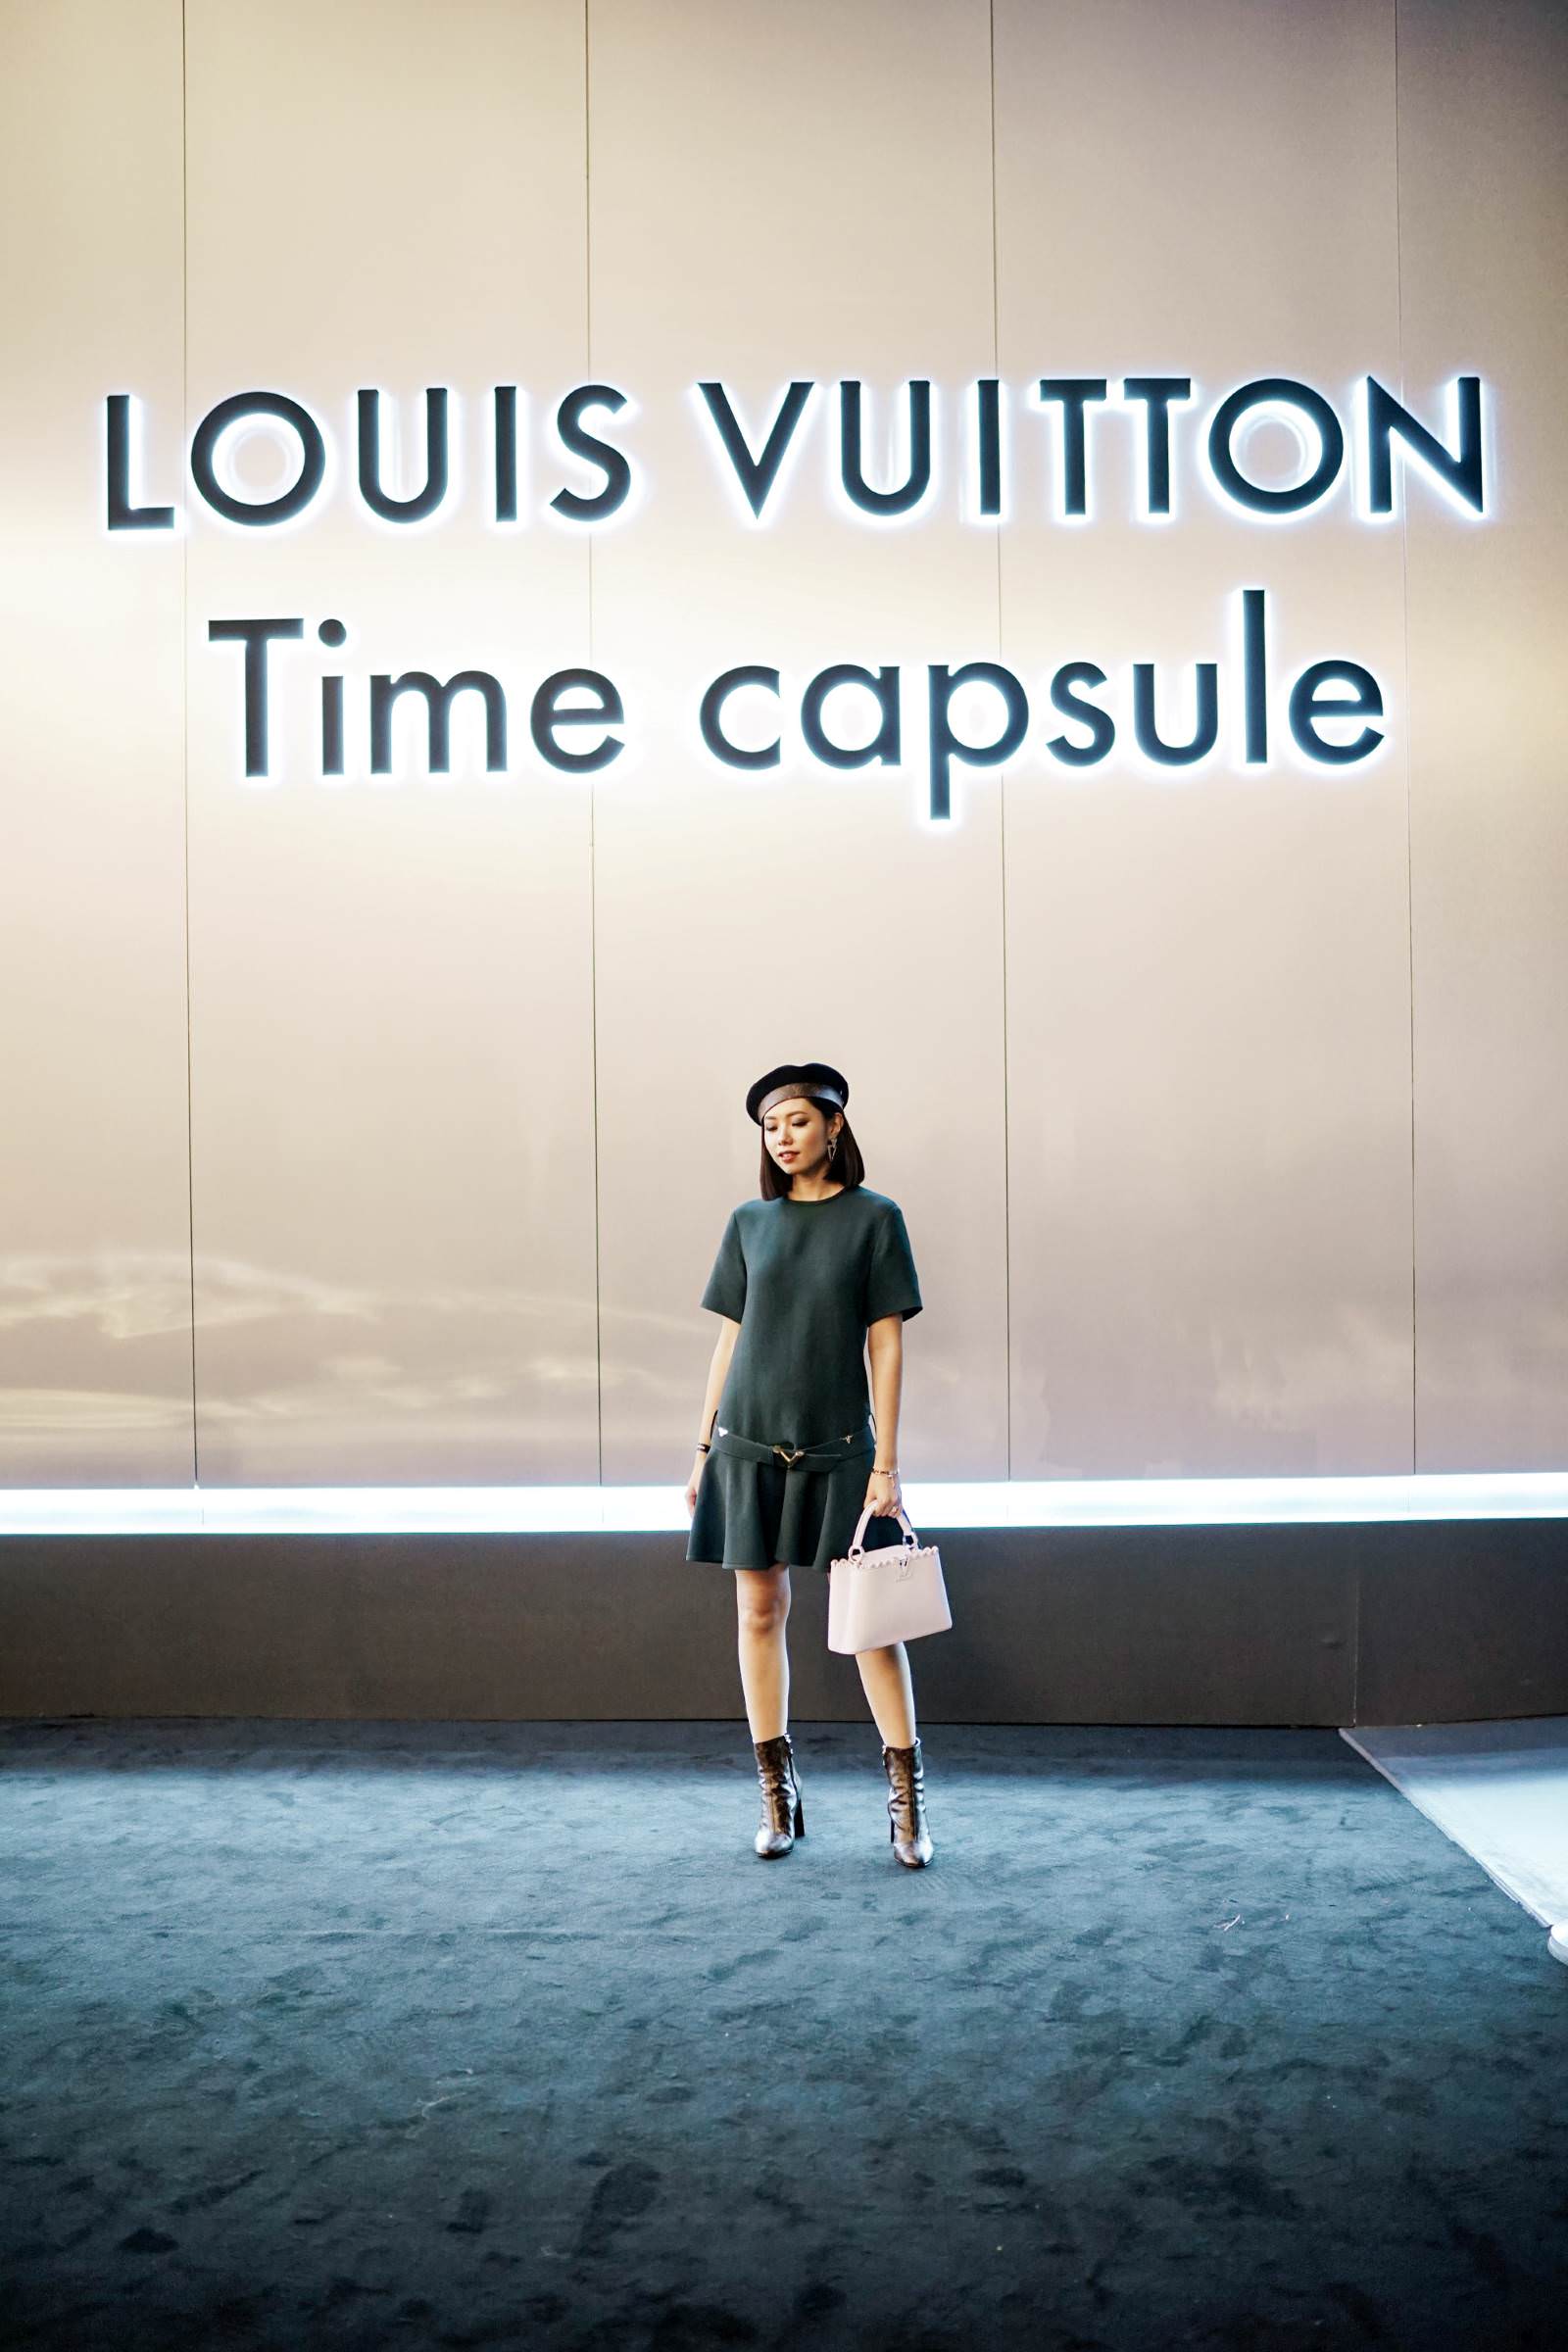 What You Need To Know About Louis Vuitton's Upcoming Exhibition In Singapore